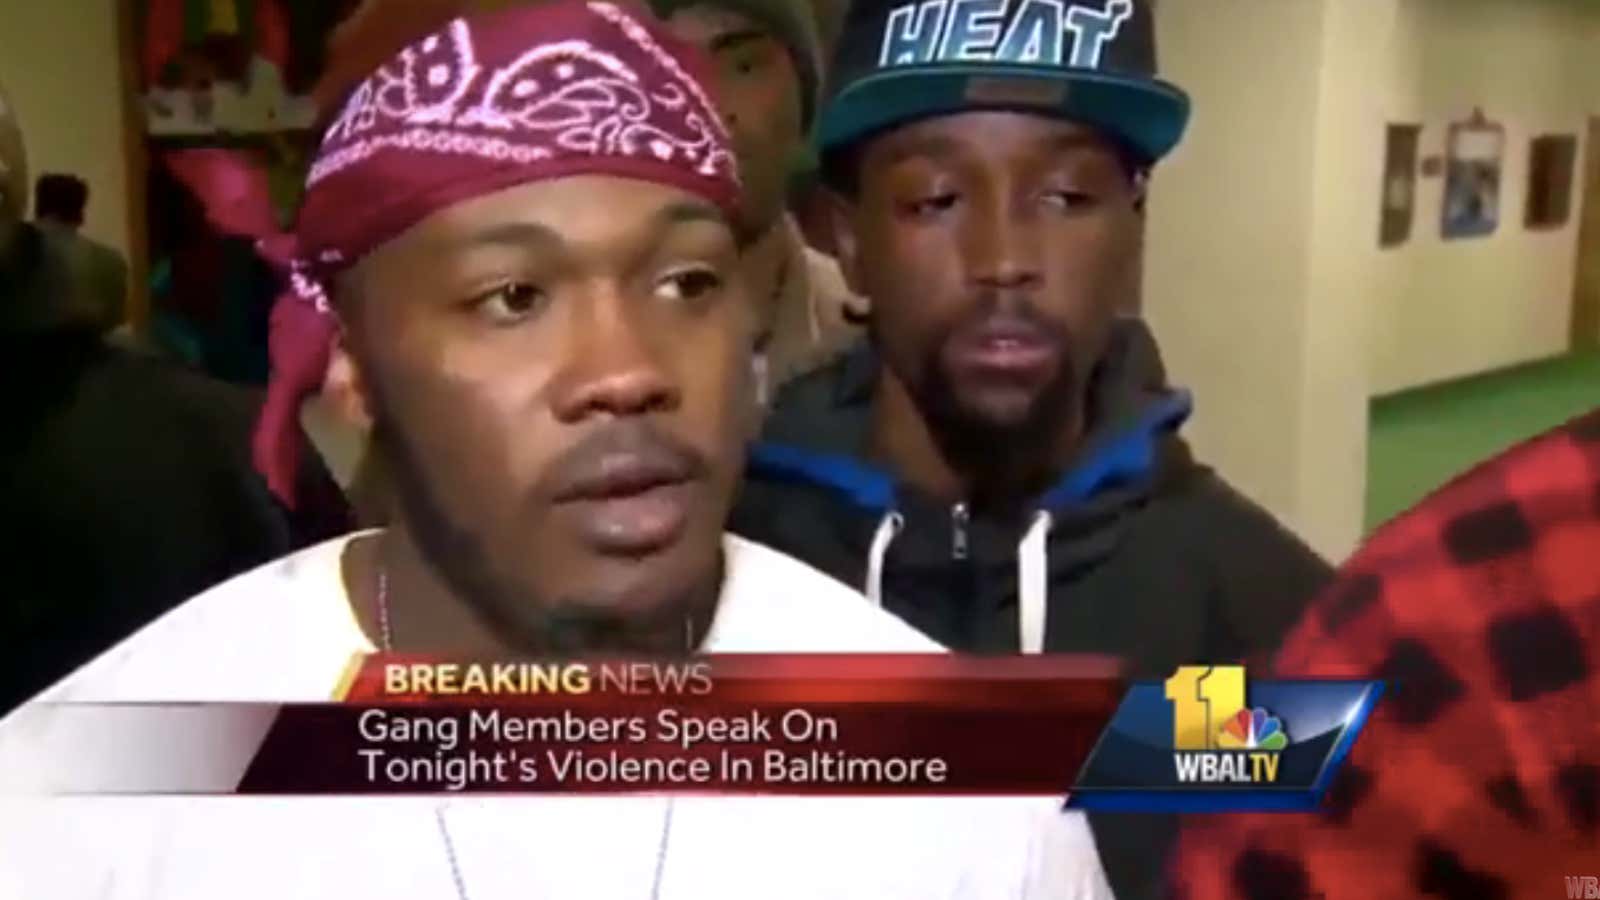 Video: America’s most notorious gangs come together against police brutality in Baltimore